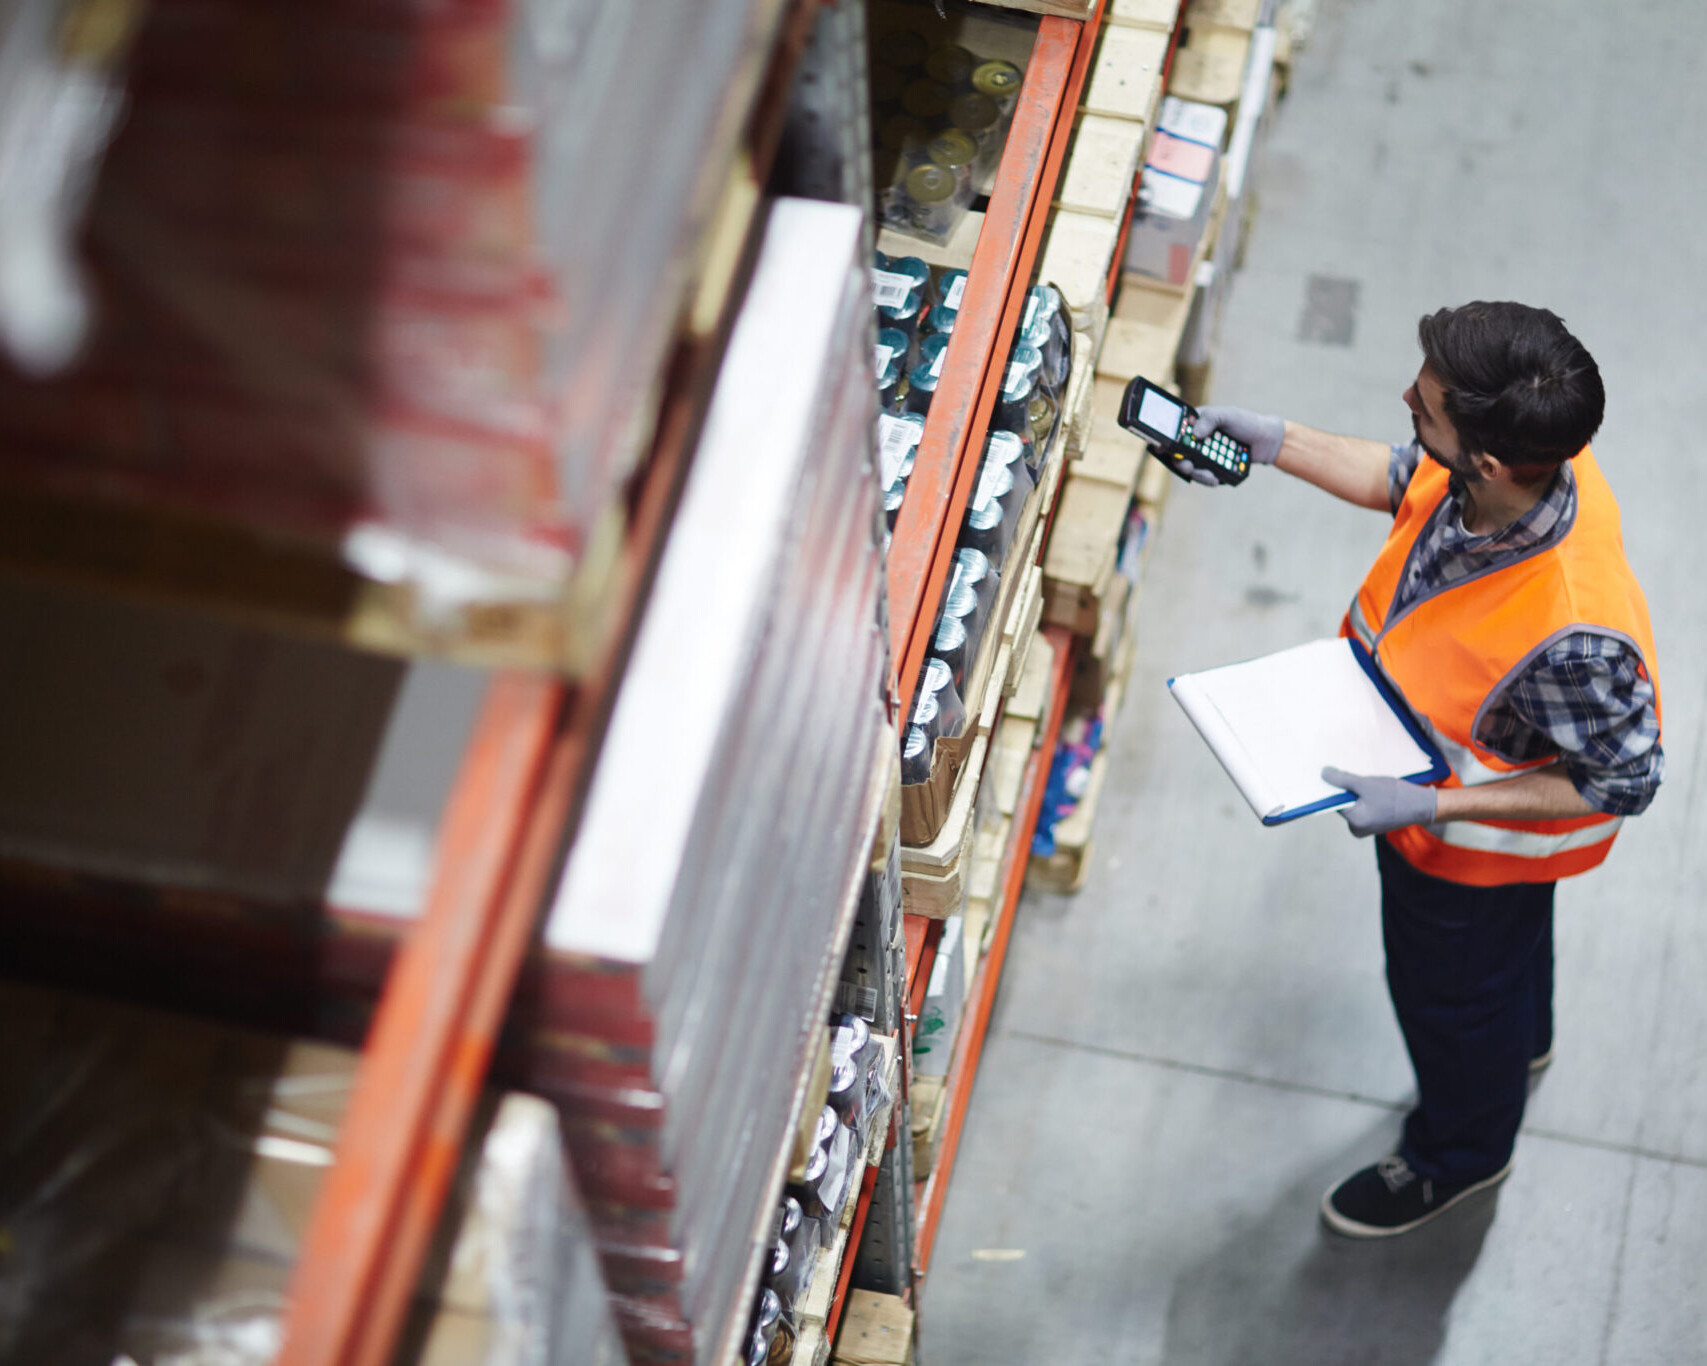 An image of a man checking goods in a warehouse